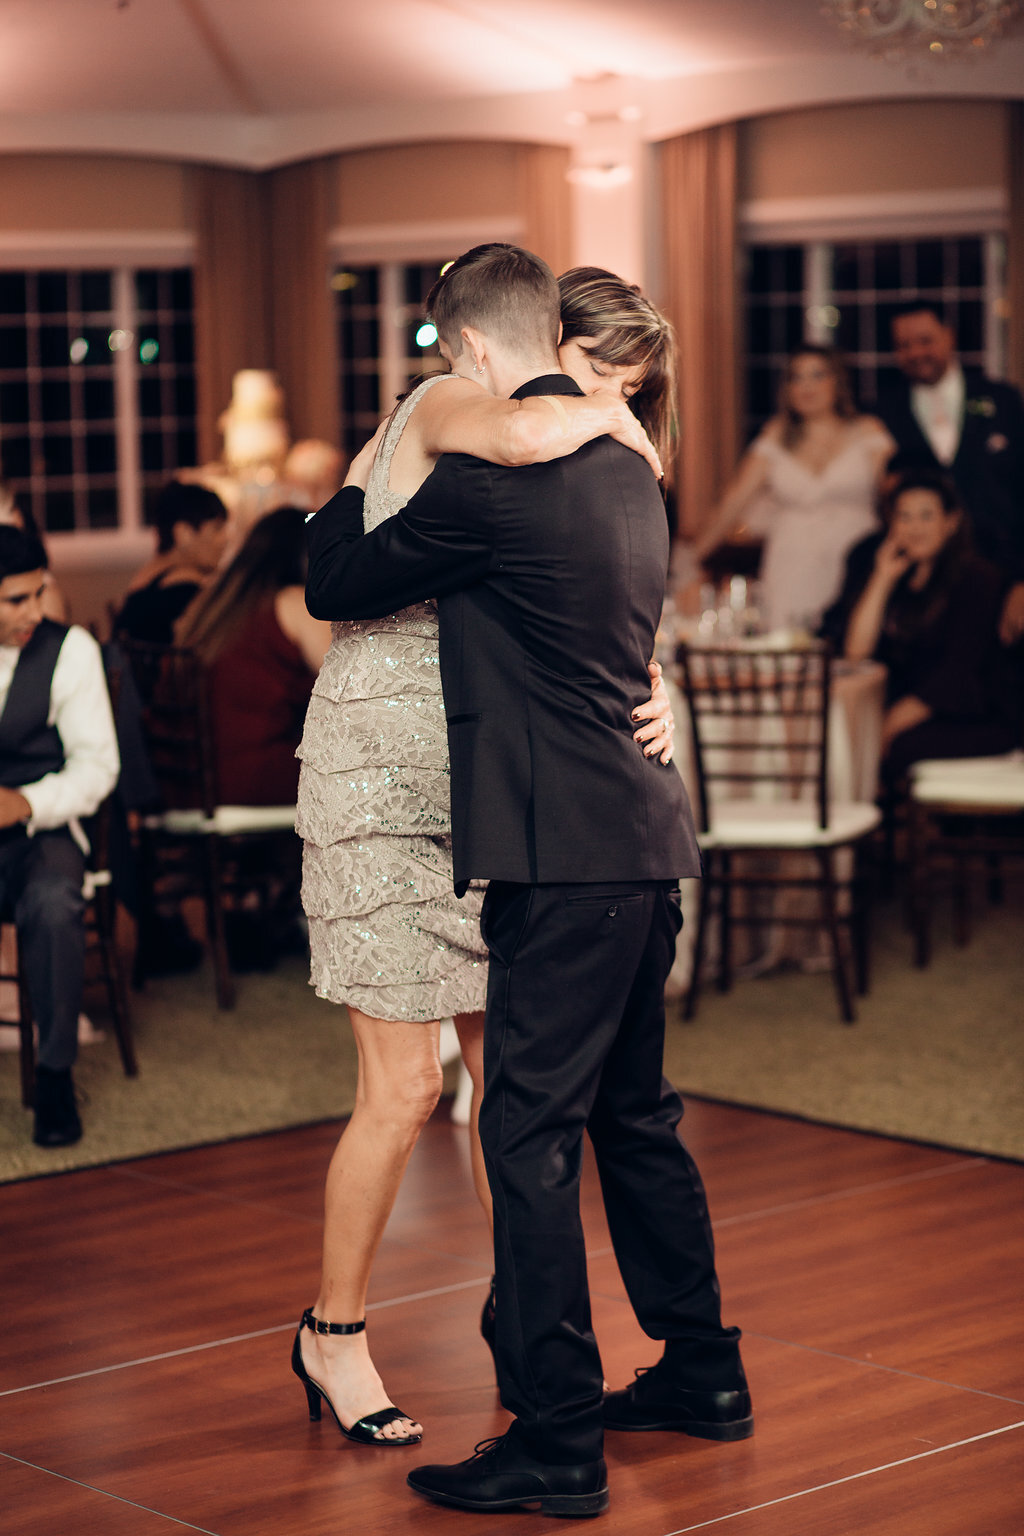 Wedding Photograph Of Groom In Black Suit And Woman In Light Brown Dress Hugging Each Other Los Angeles